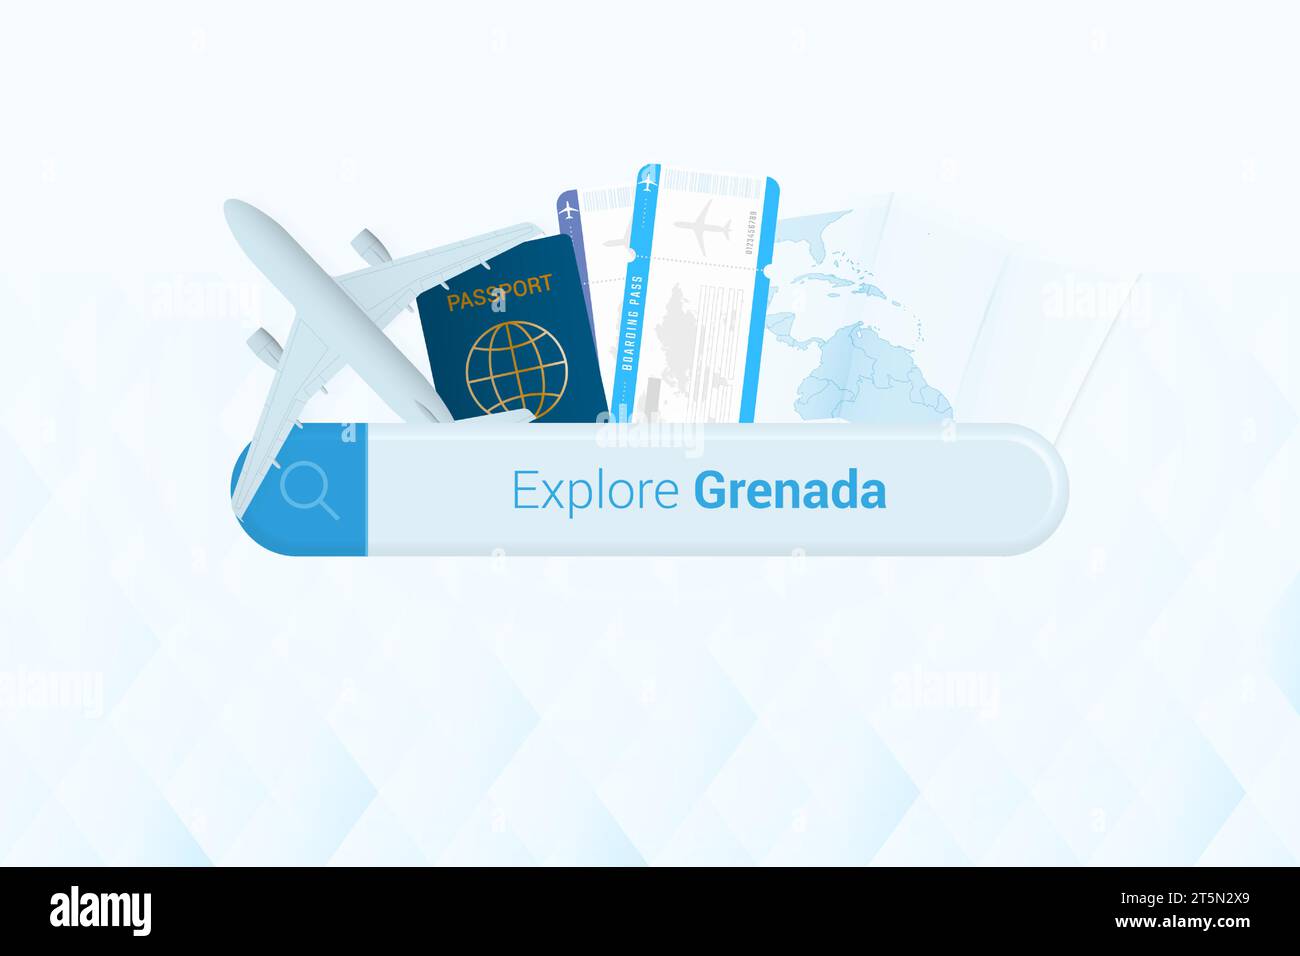 Searching tickets to Grenada or travel destination in Grenada. Searching bar with airplane, passport, boarding pass, tickets and map. Vector illustrat Stock Vector